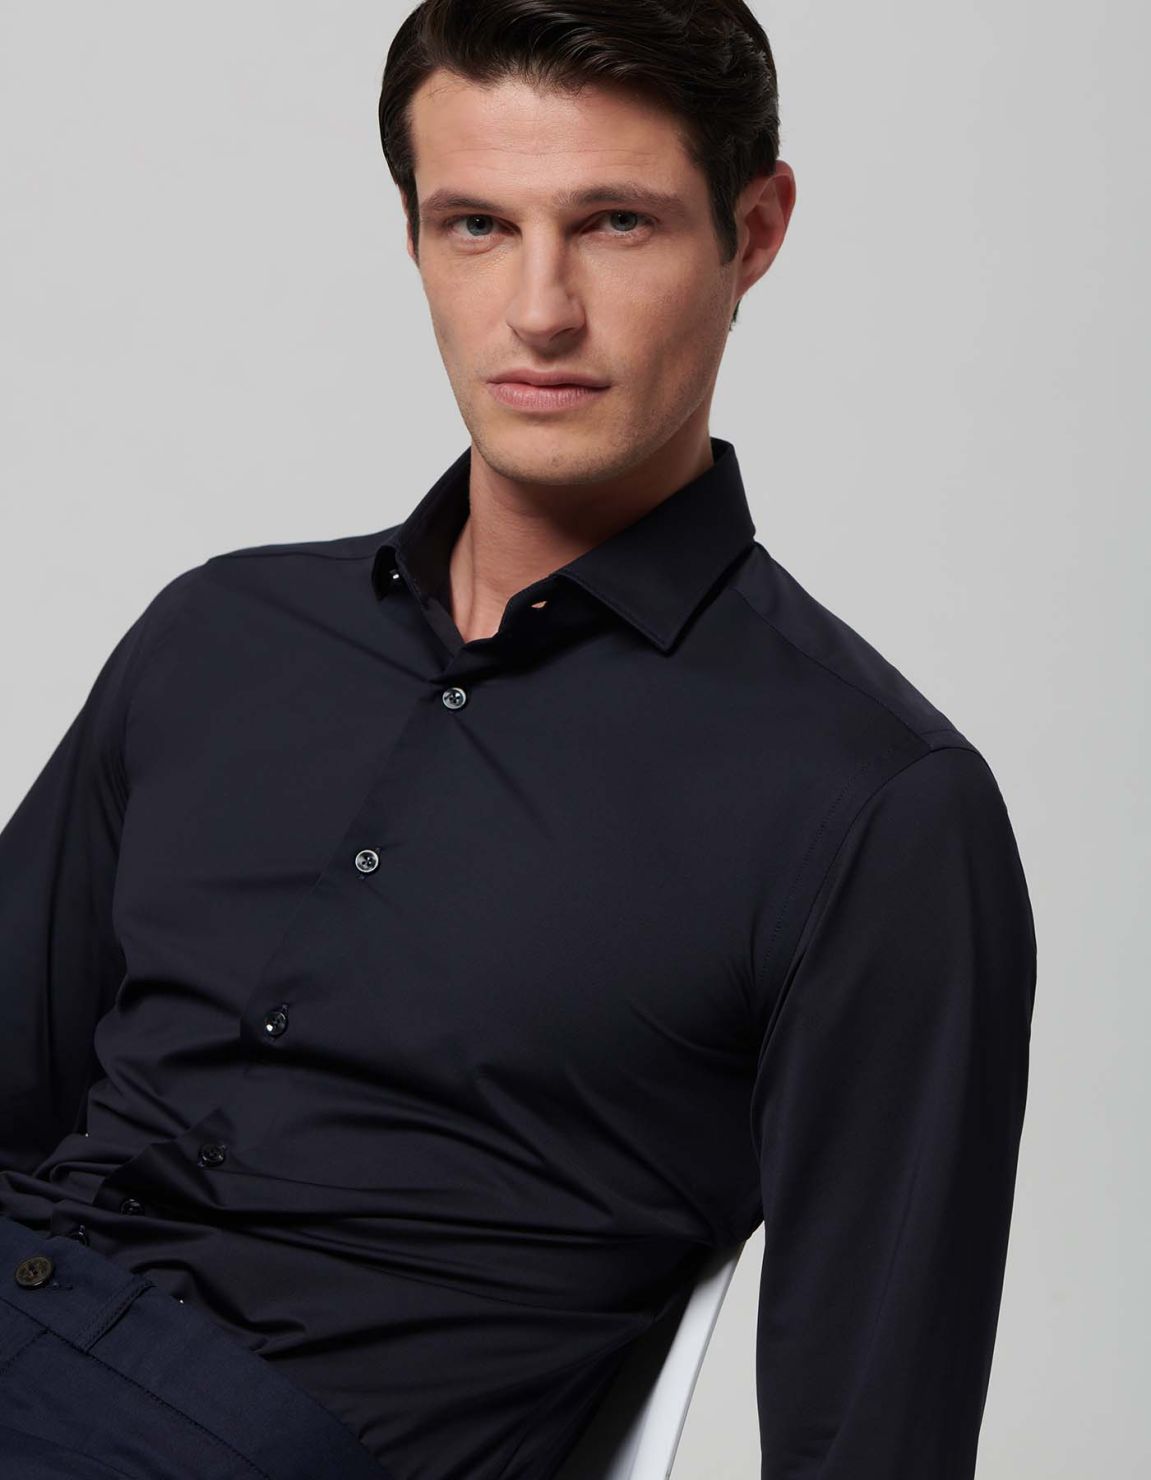 Navy Blue Textured Solid colour Shirt Collar small cutaway Evolution Classic Fit 1